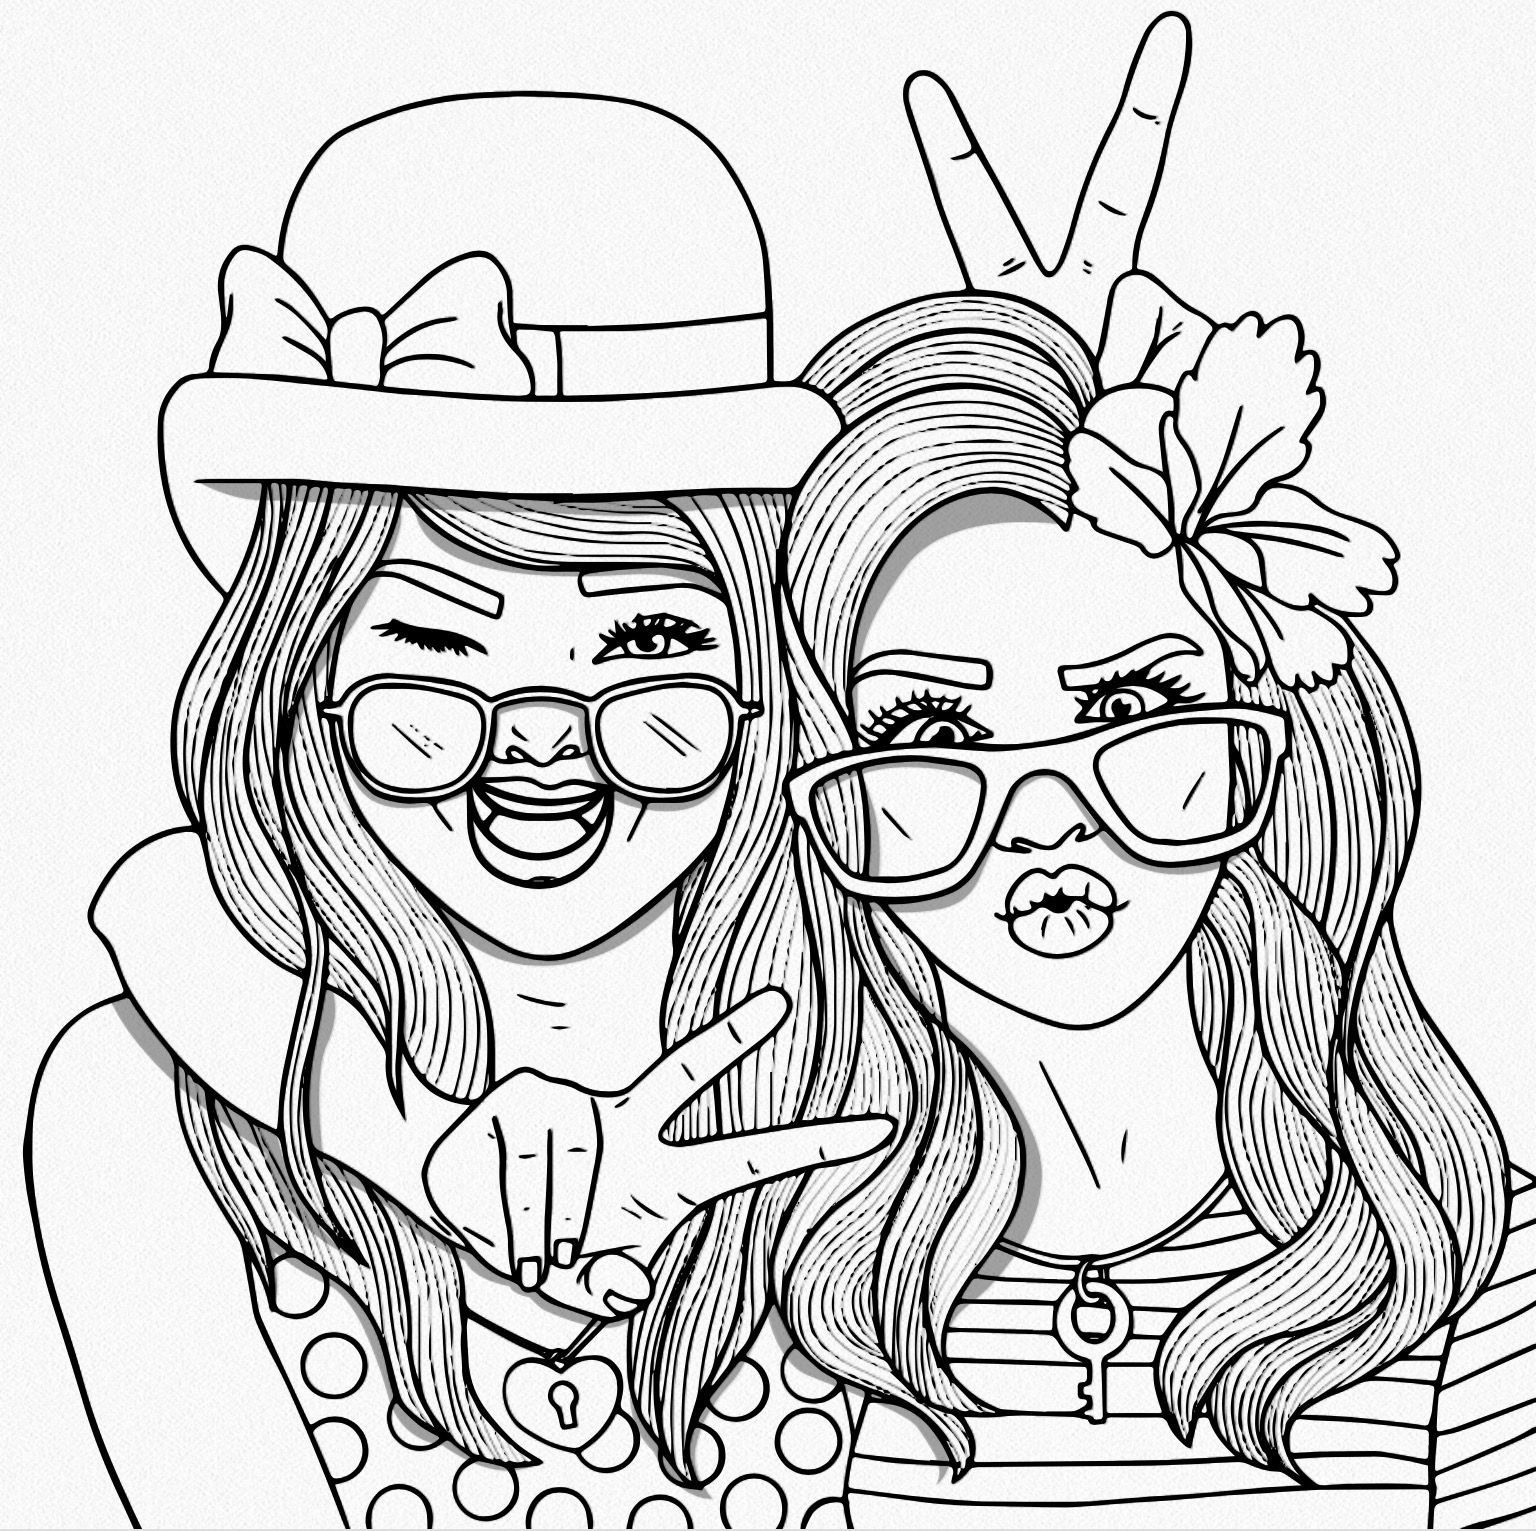 24+ Best Picture of Recolor Coloring Pages - davemelillo.com | People coloring  pages, Barbie coloring pages, Cool coloring pages